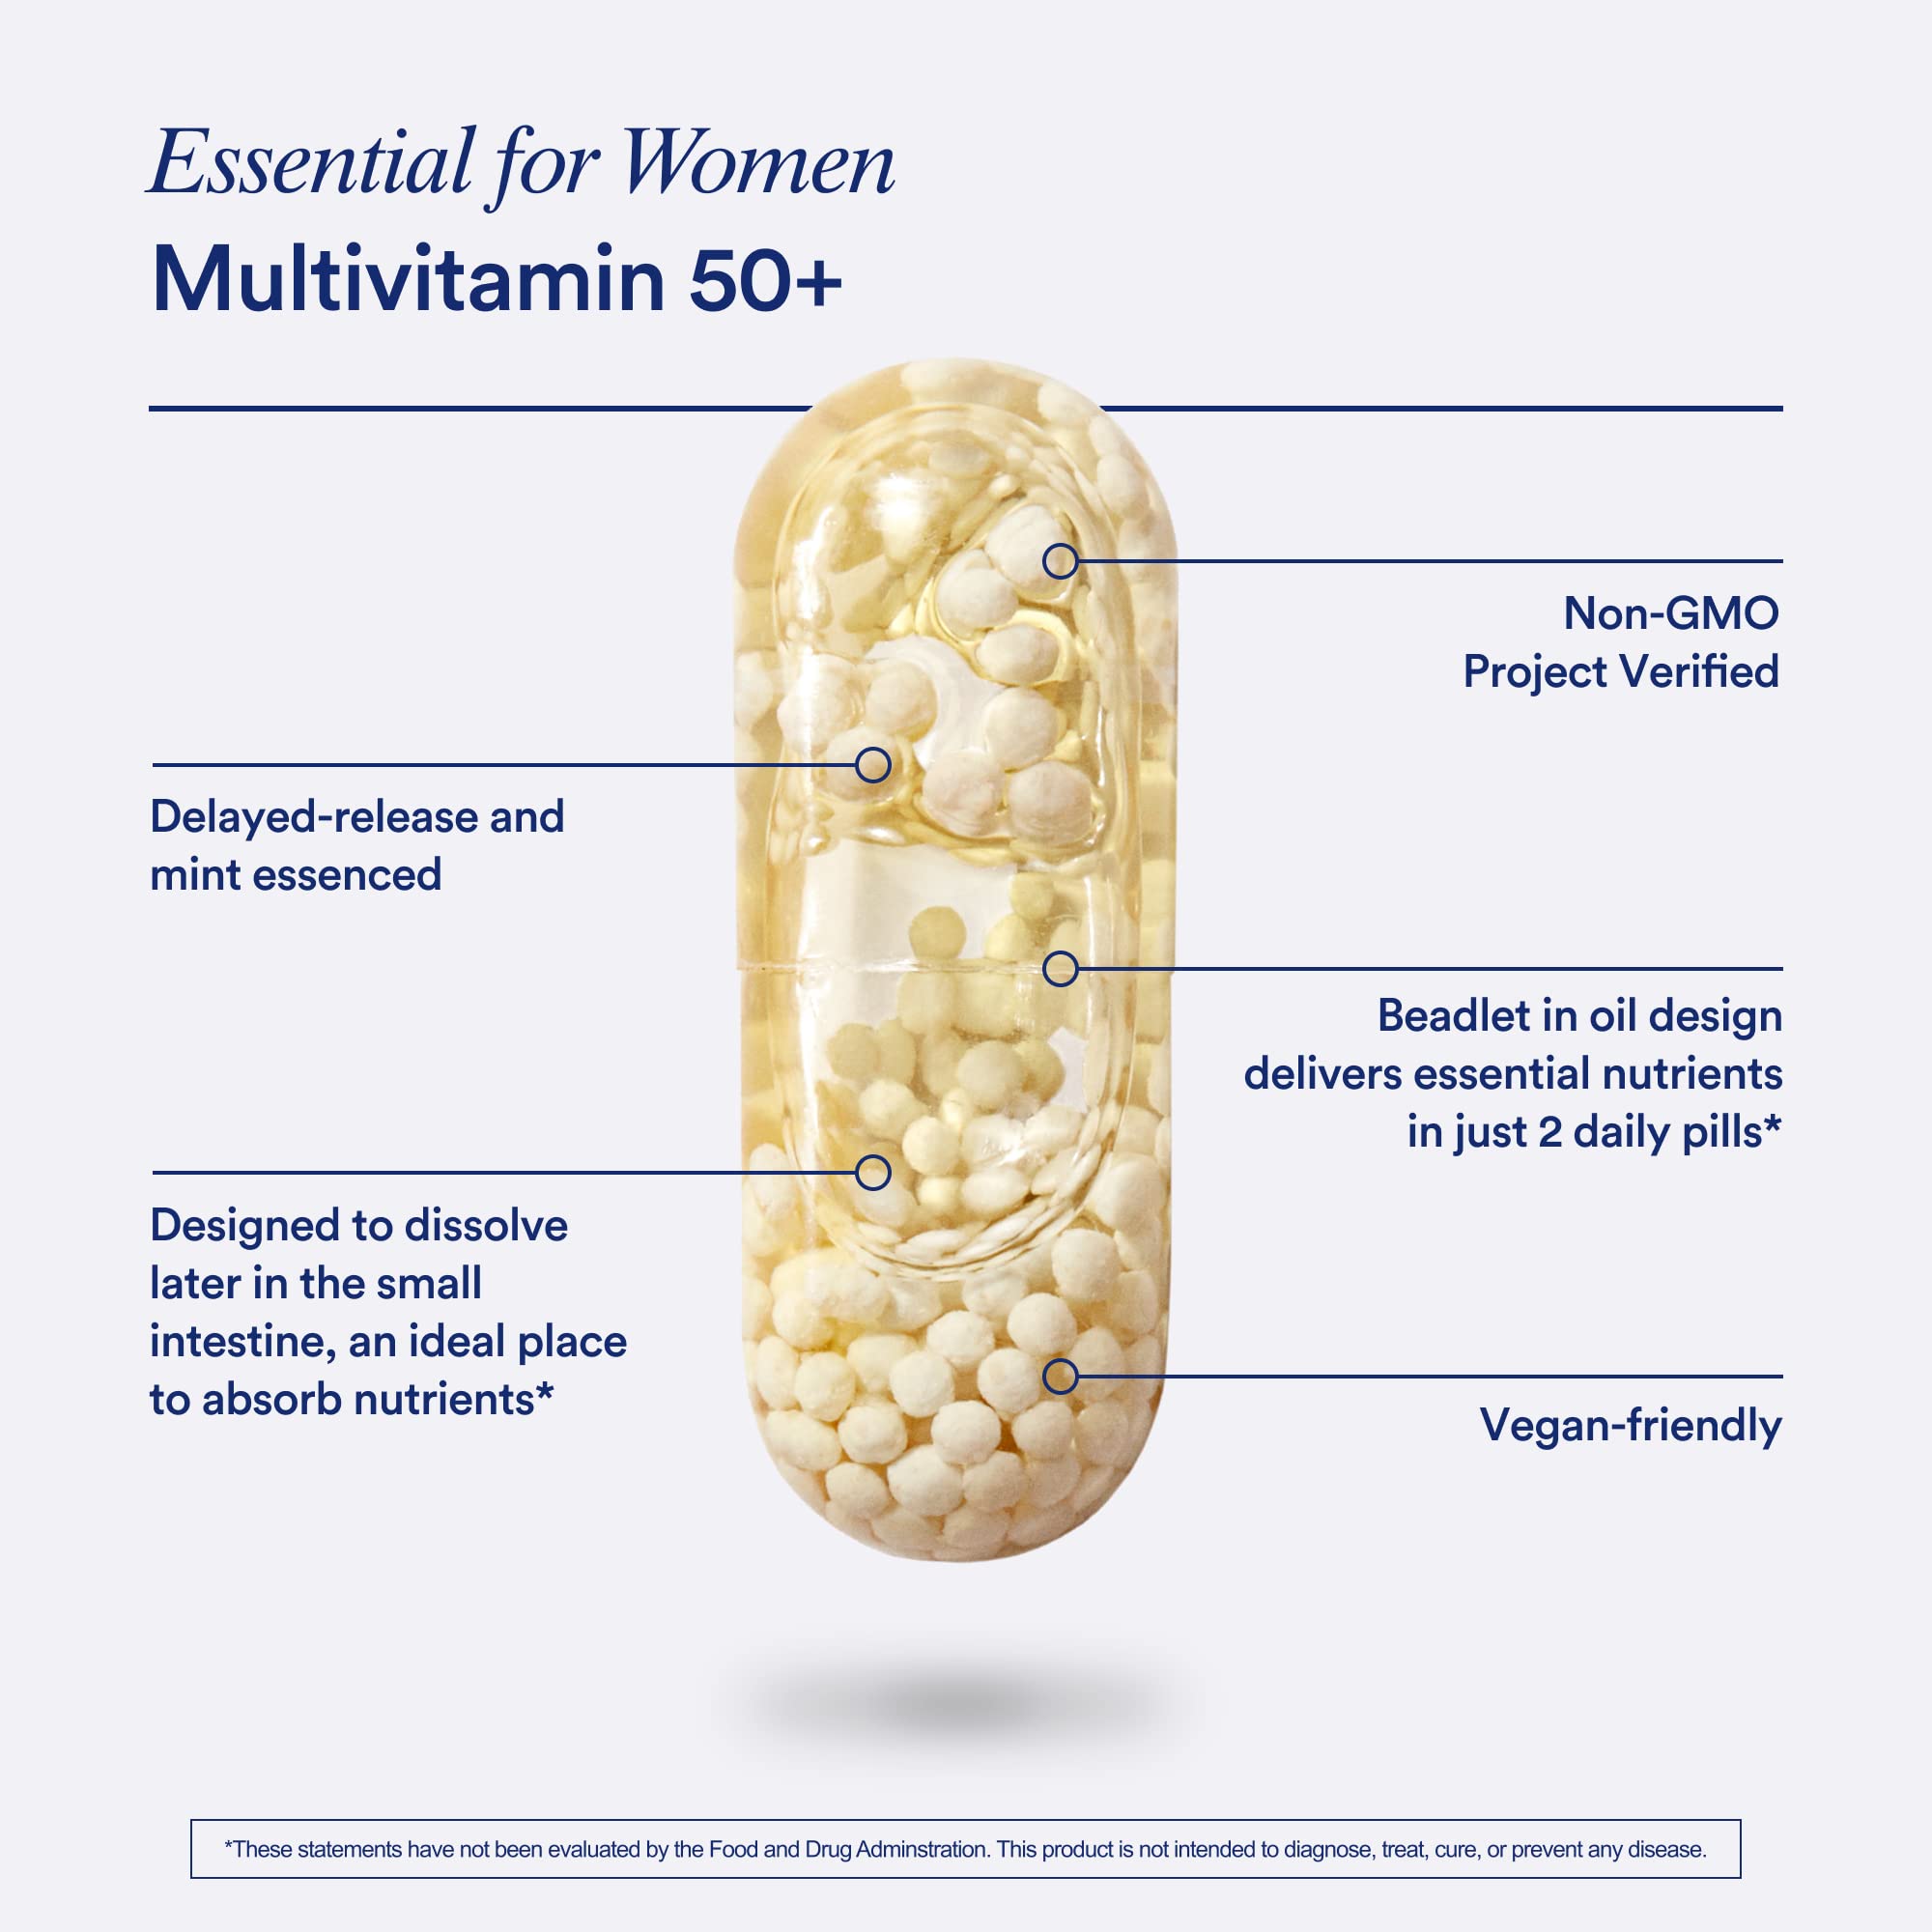 Ritual Multivitamin for Women 50 and Over, Menopause Supplements with Vitamin D3, K2 and Magnesium for Bone Support*, Omega-3 DHA, Vitamin B12, Non-GMO, Mint Essenced, 30 Day Supply, 60 Vegan Capsules